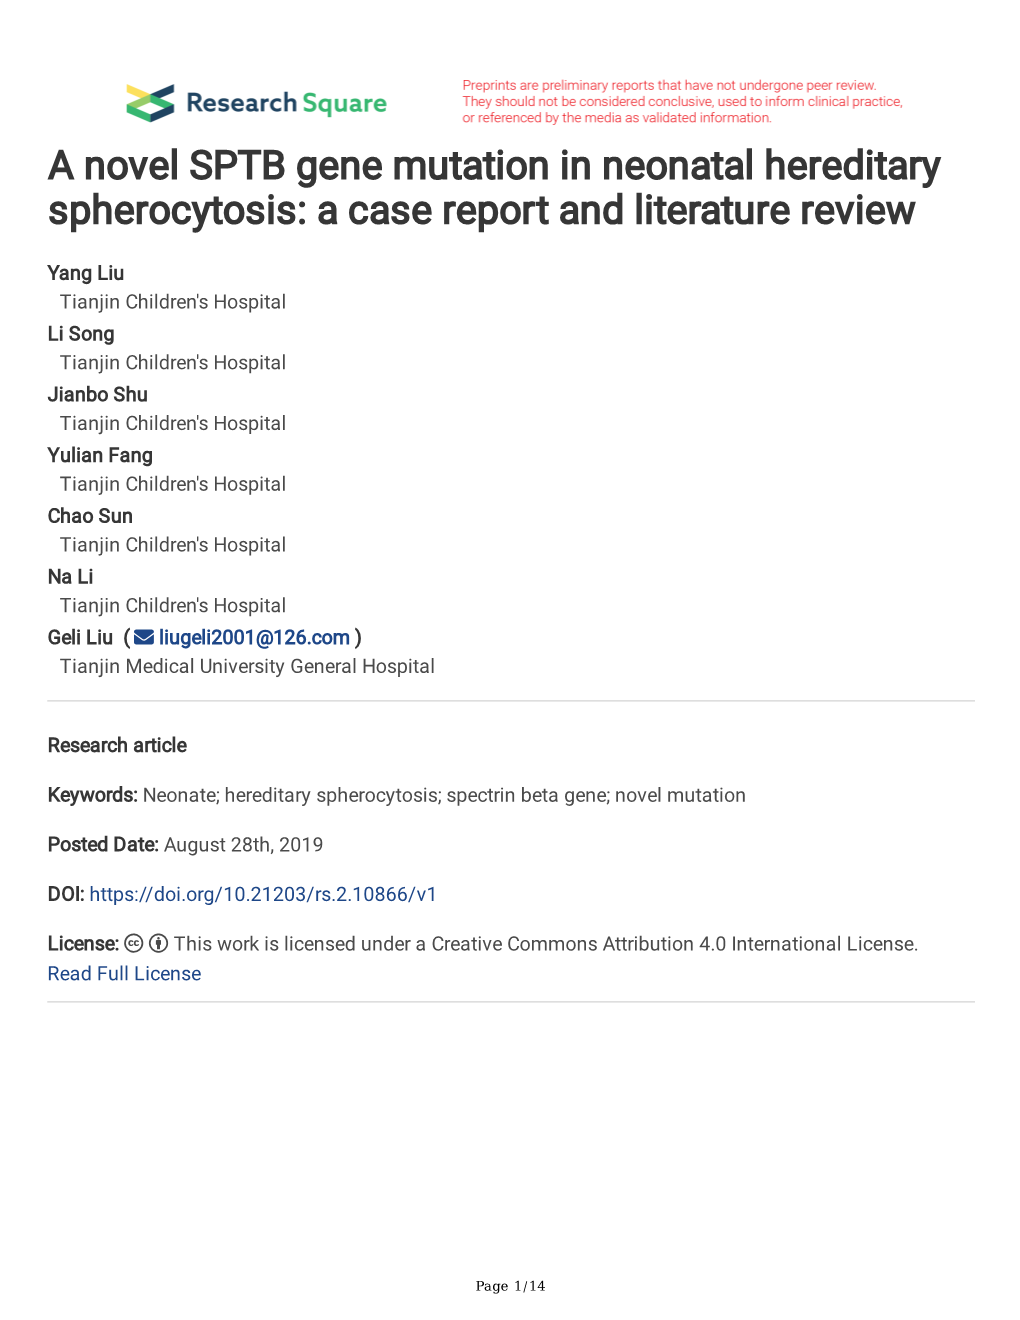 A Novel SPTB Gene Mutation in Neonatal Hereditary Spherocytosis: a Case Report and Literature Review